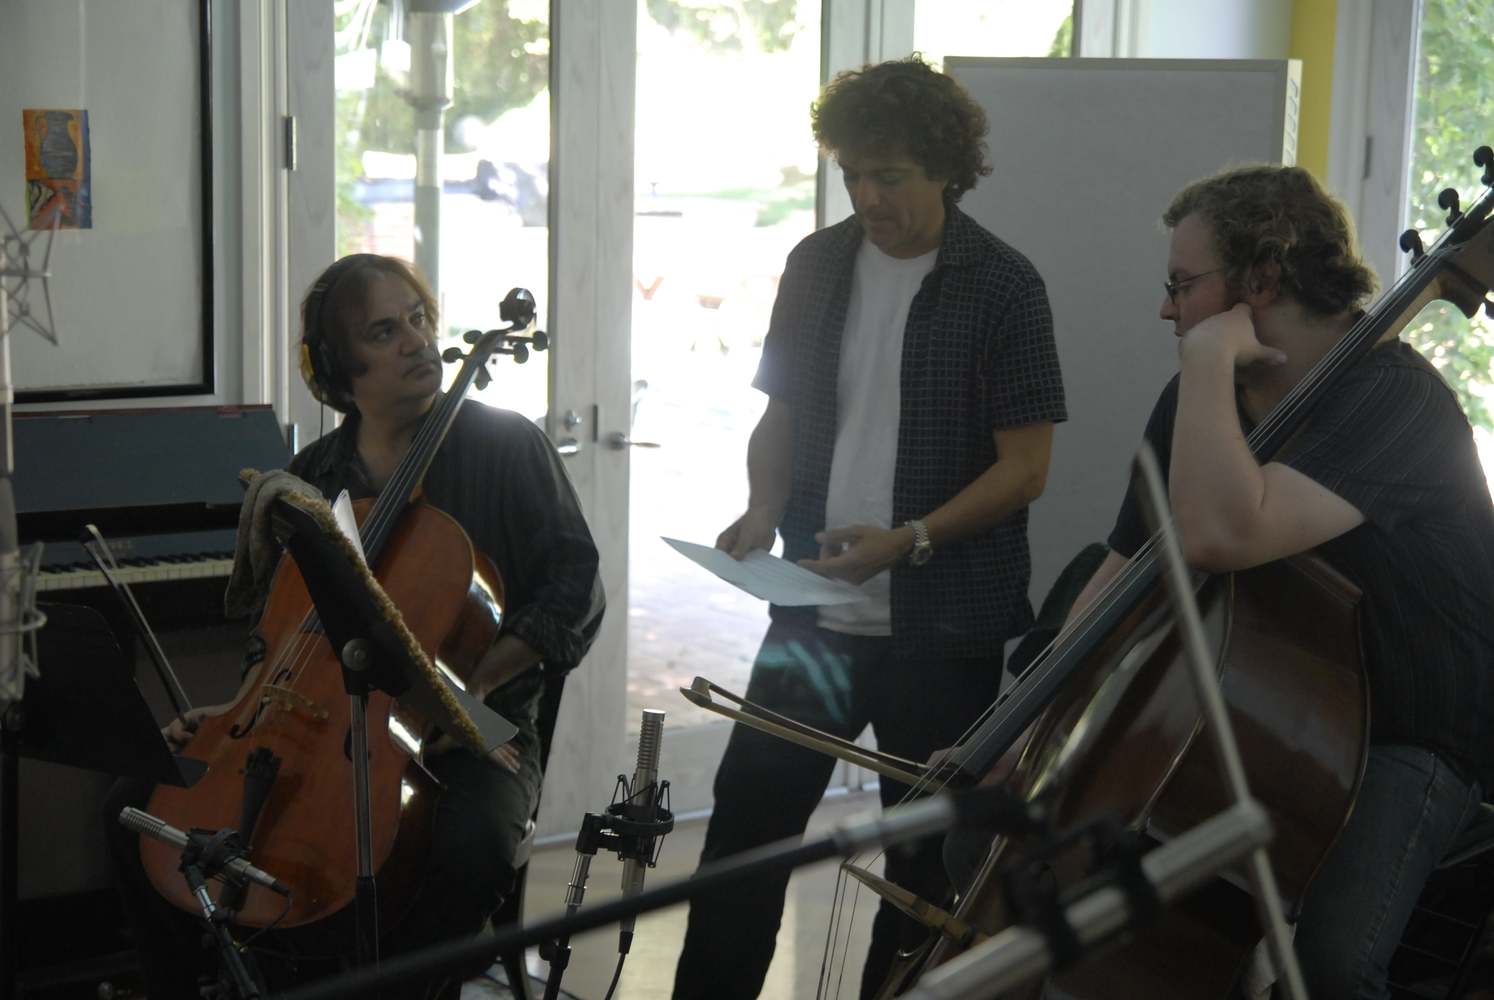 composer Anthony Marinelli working with string trio on the score to the feature film “Footsteps”, Encino, CA, 2006